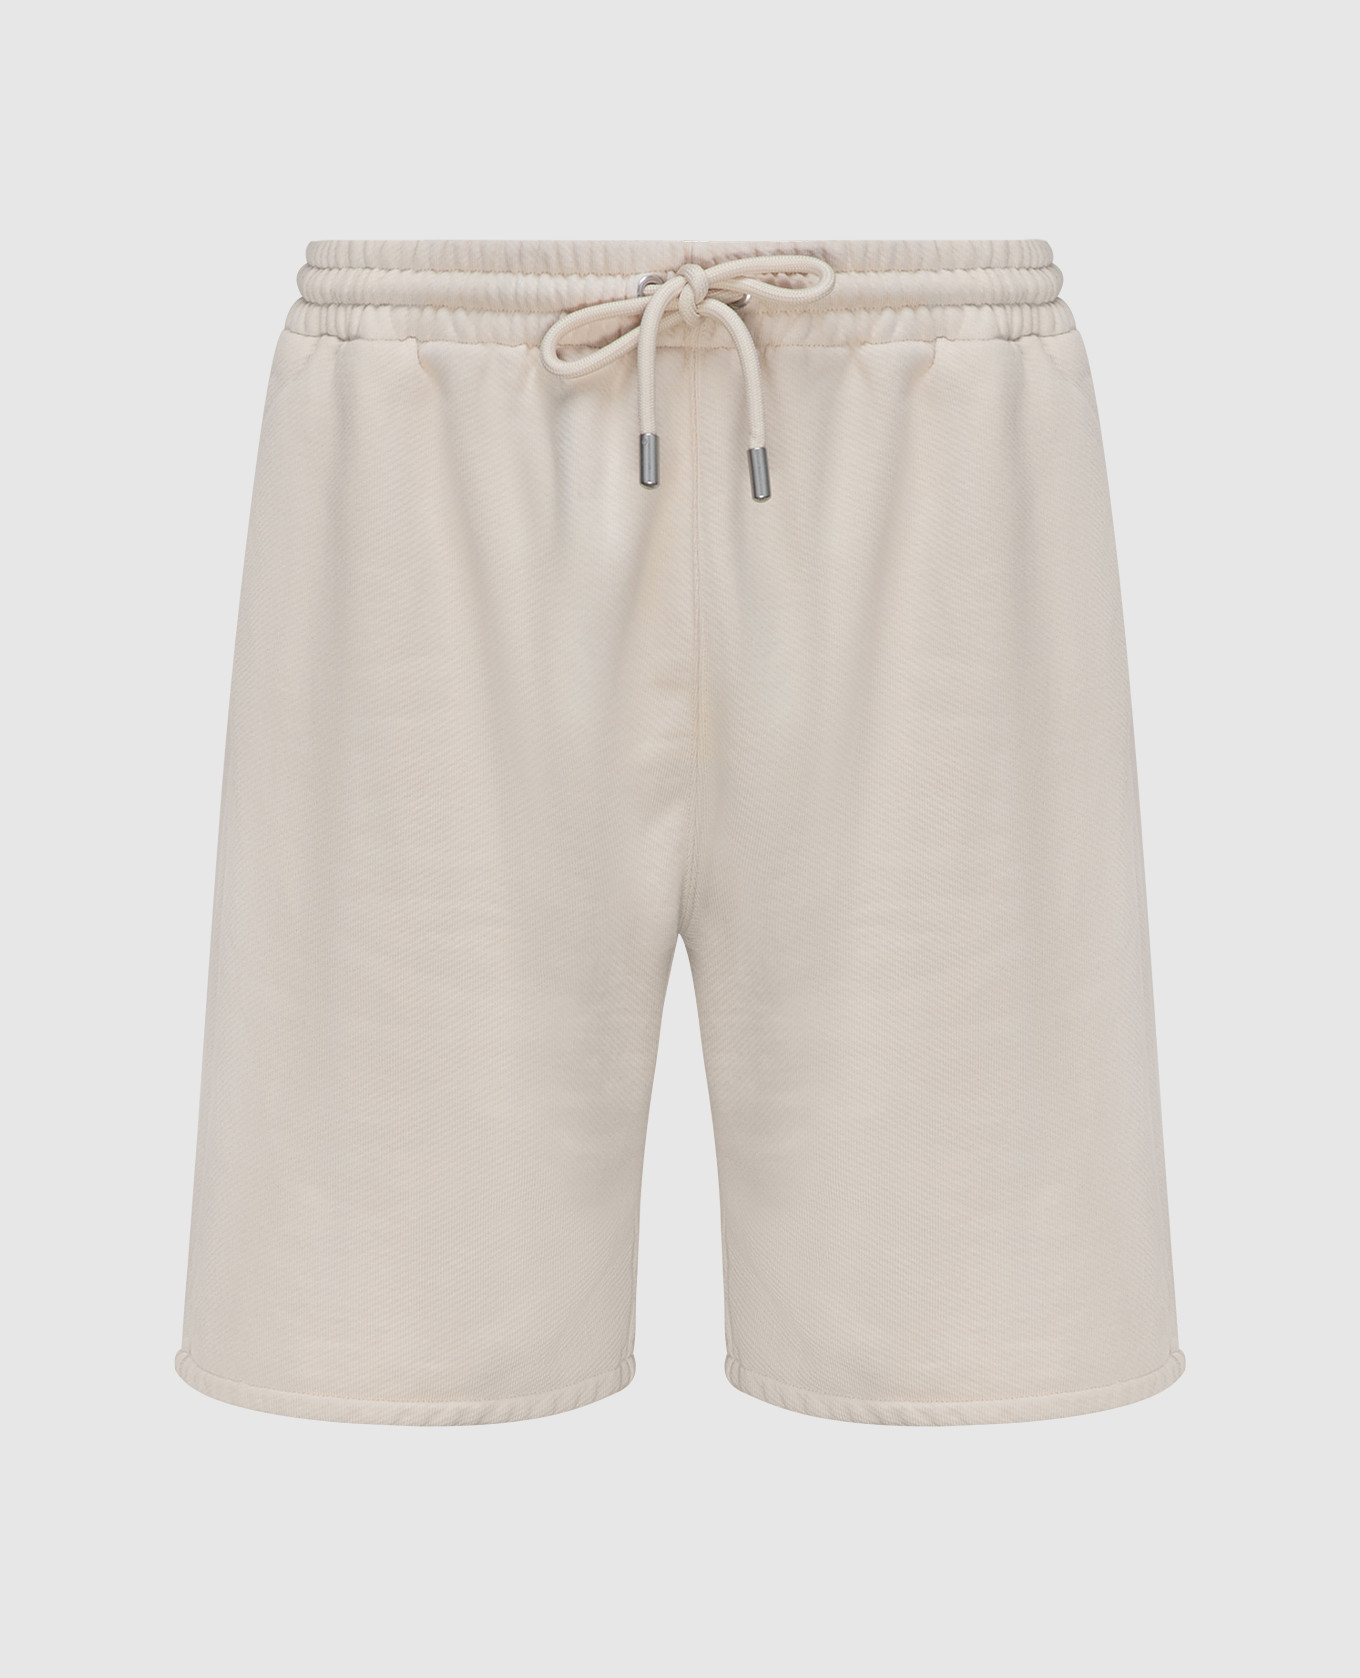 Beige shorts with logo embroidery